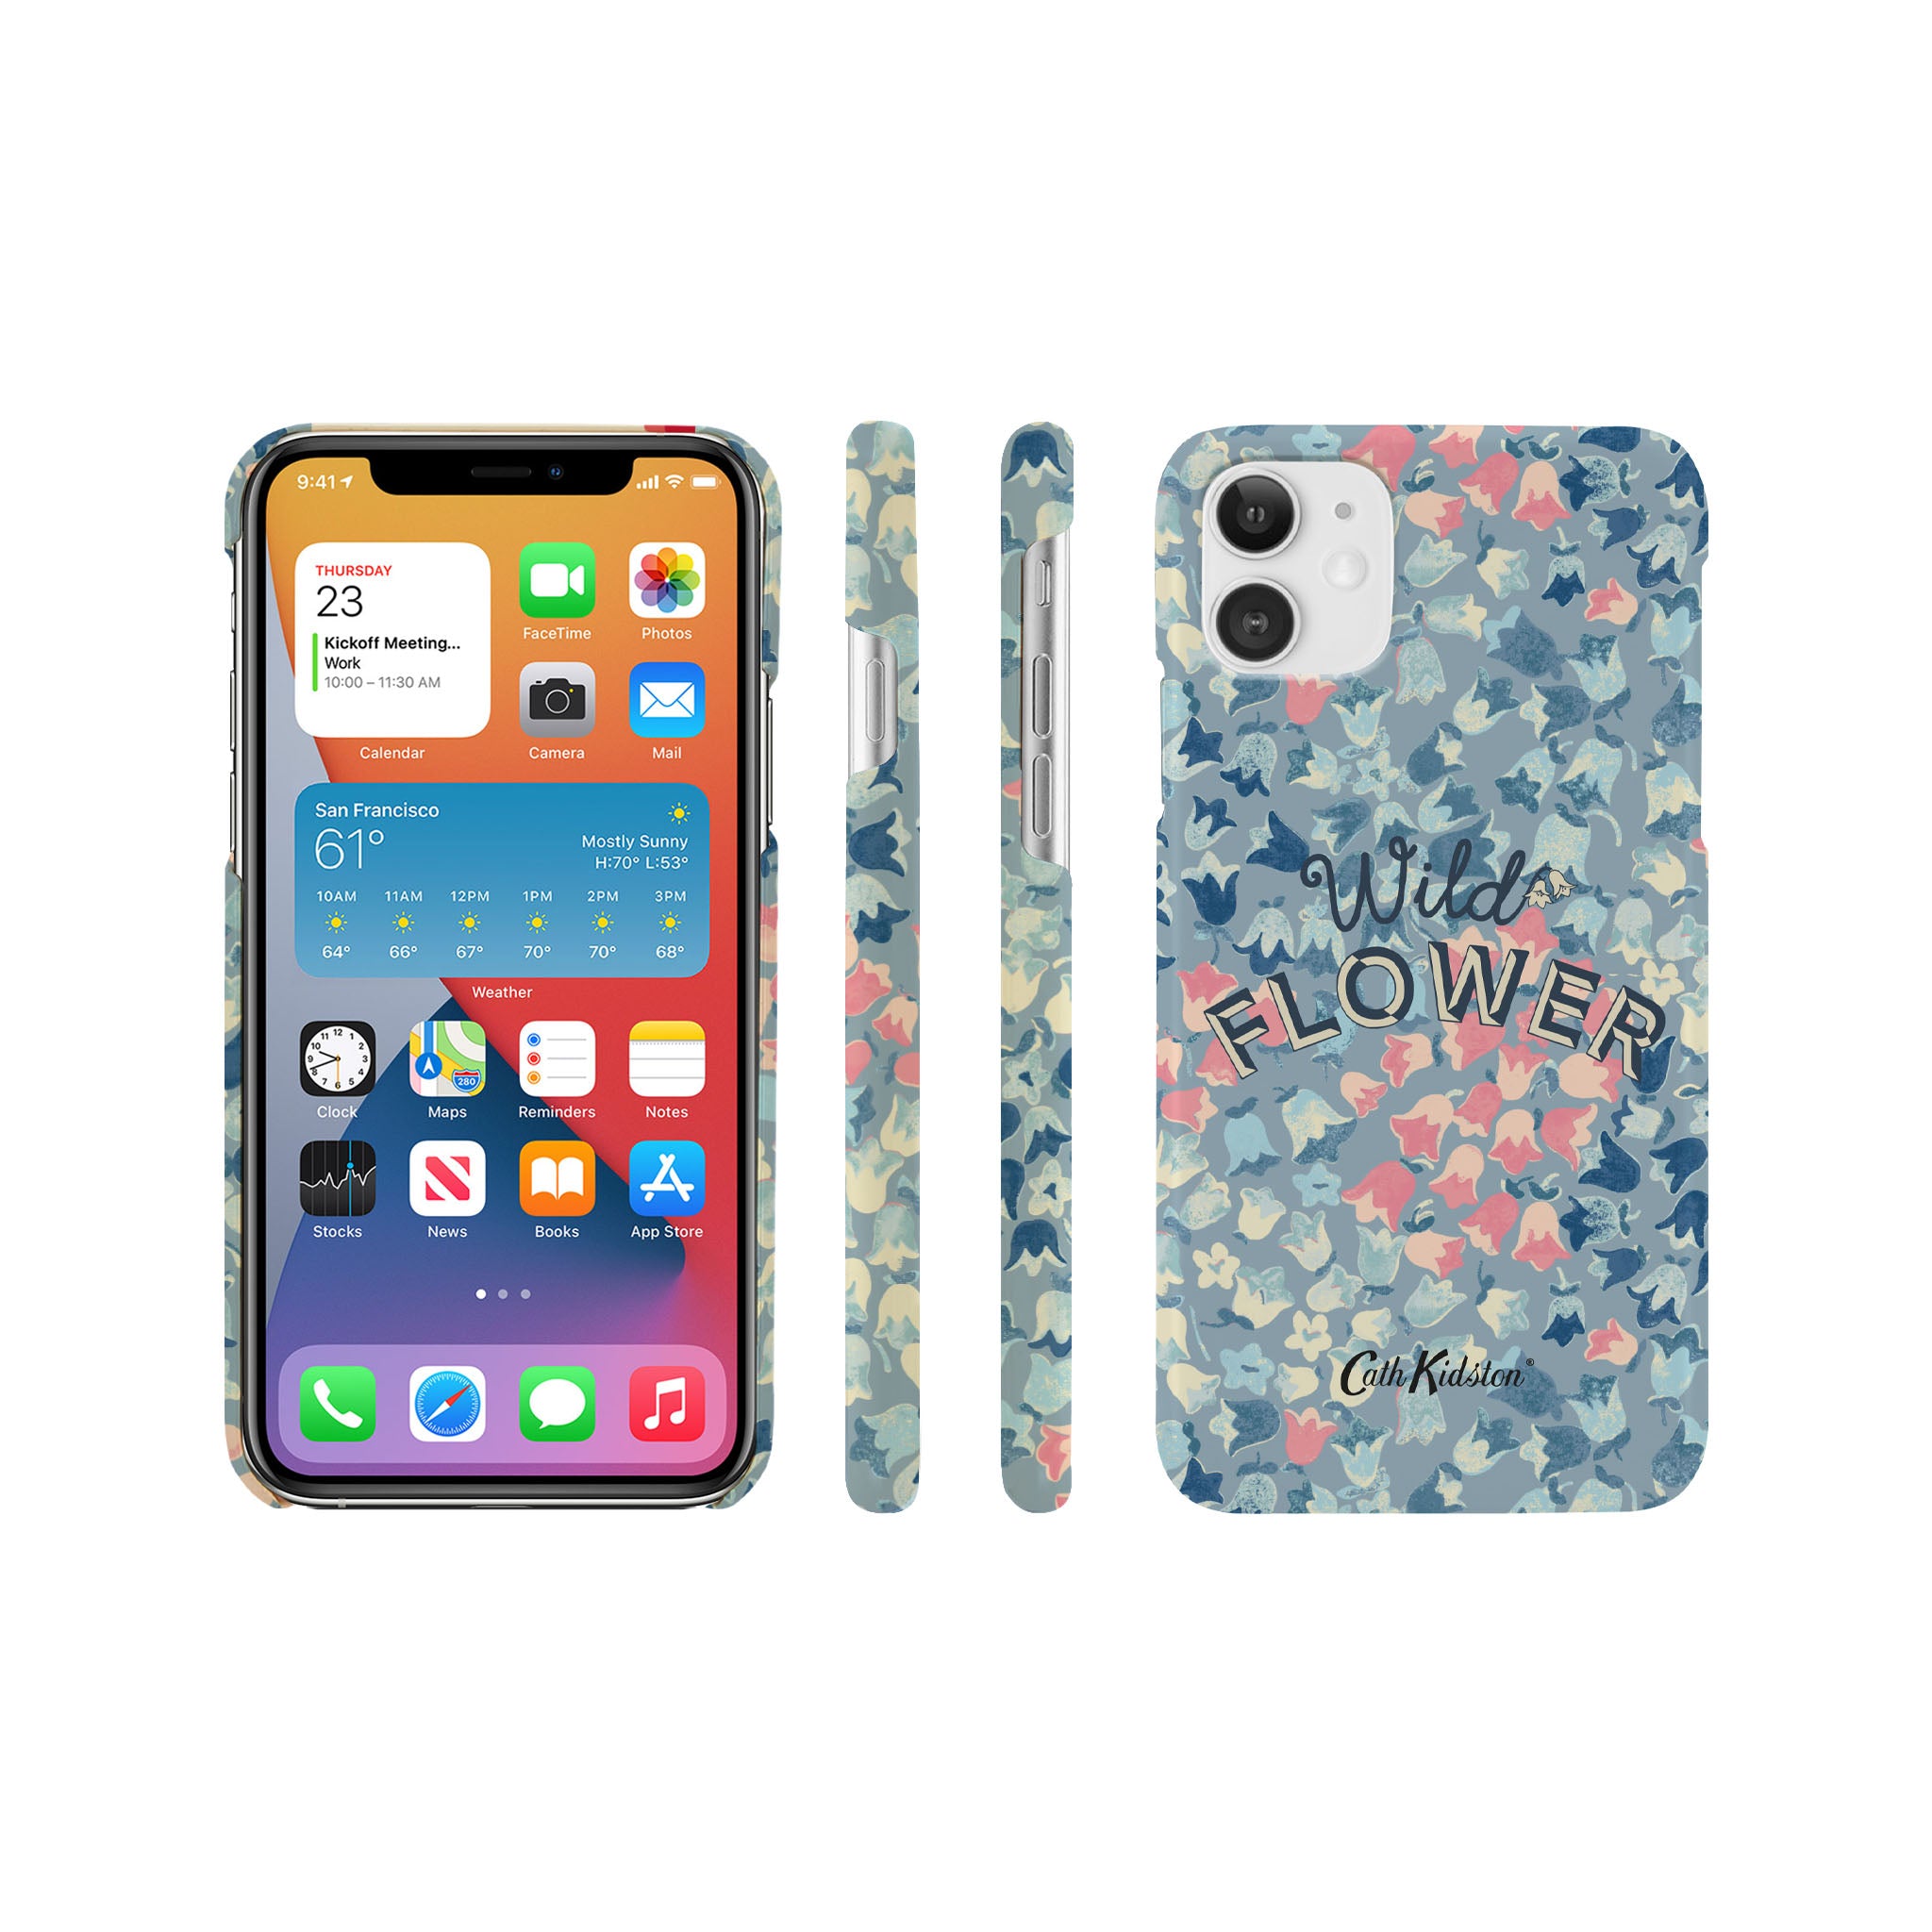 The MYVQ iPhone X/XS series premium high gloss scratch-resistant phone case. Featuring a luxurious microfiber insert to cradle and protect your smartphone device.  